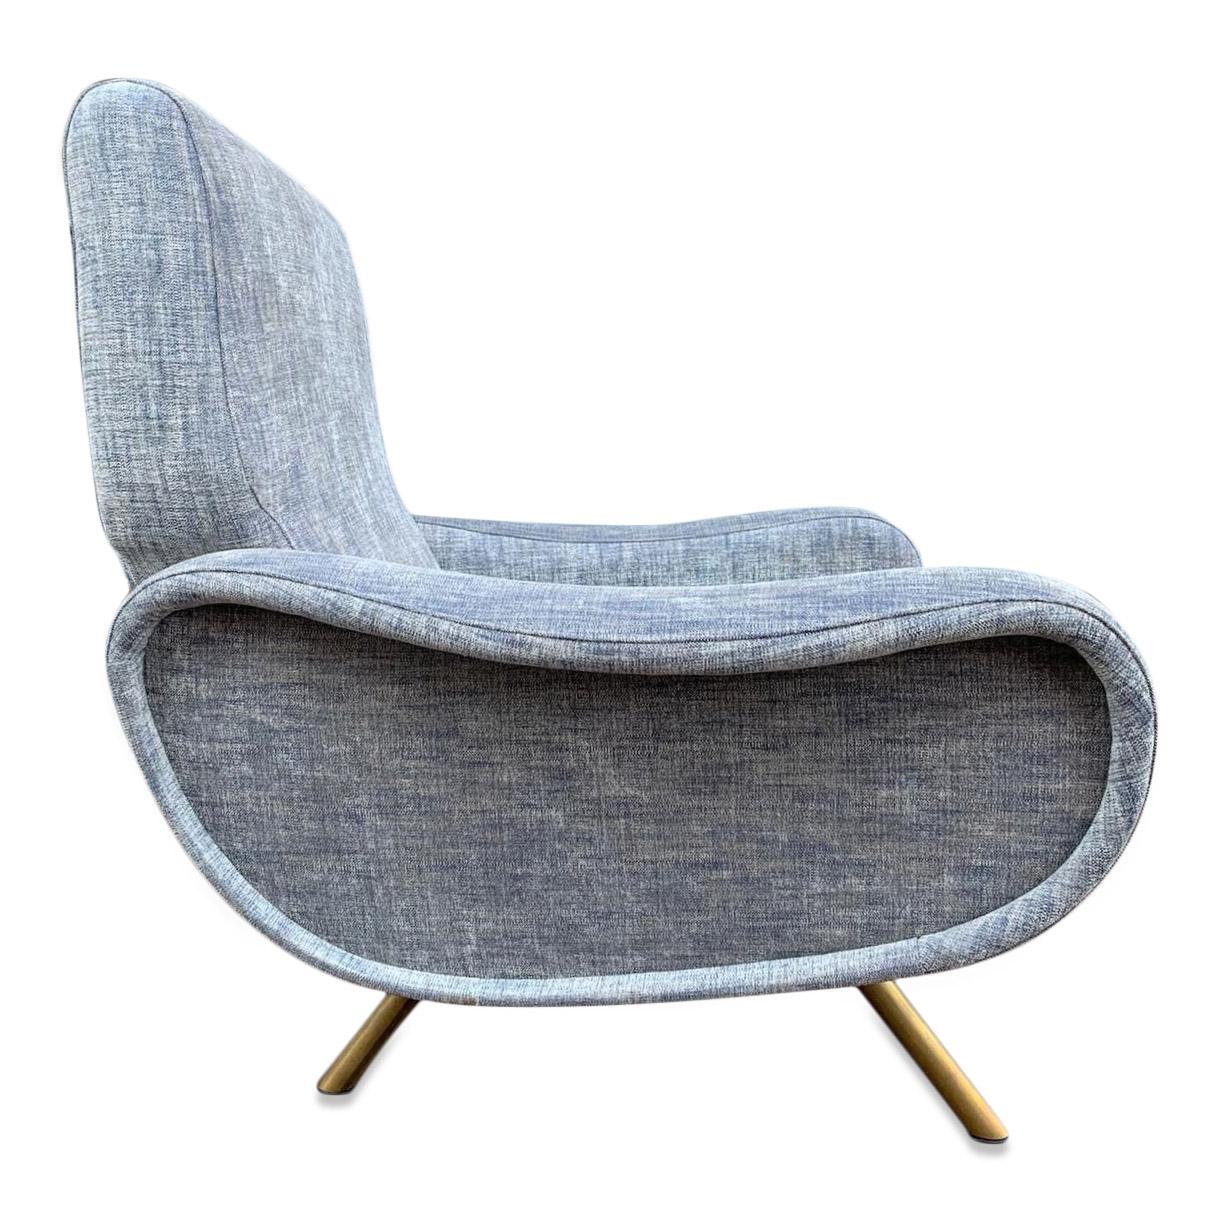 First edition, 1951
Arflex
Arflex tag
patinated brass feet
New Kvadrat fabric upholstery in blue grey shades
these armchairs will ship from Paris and can be returned to either Paris or NY location (feet will be disassembled for safer